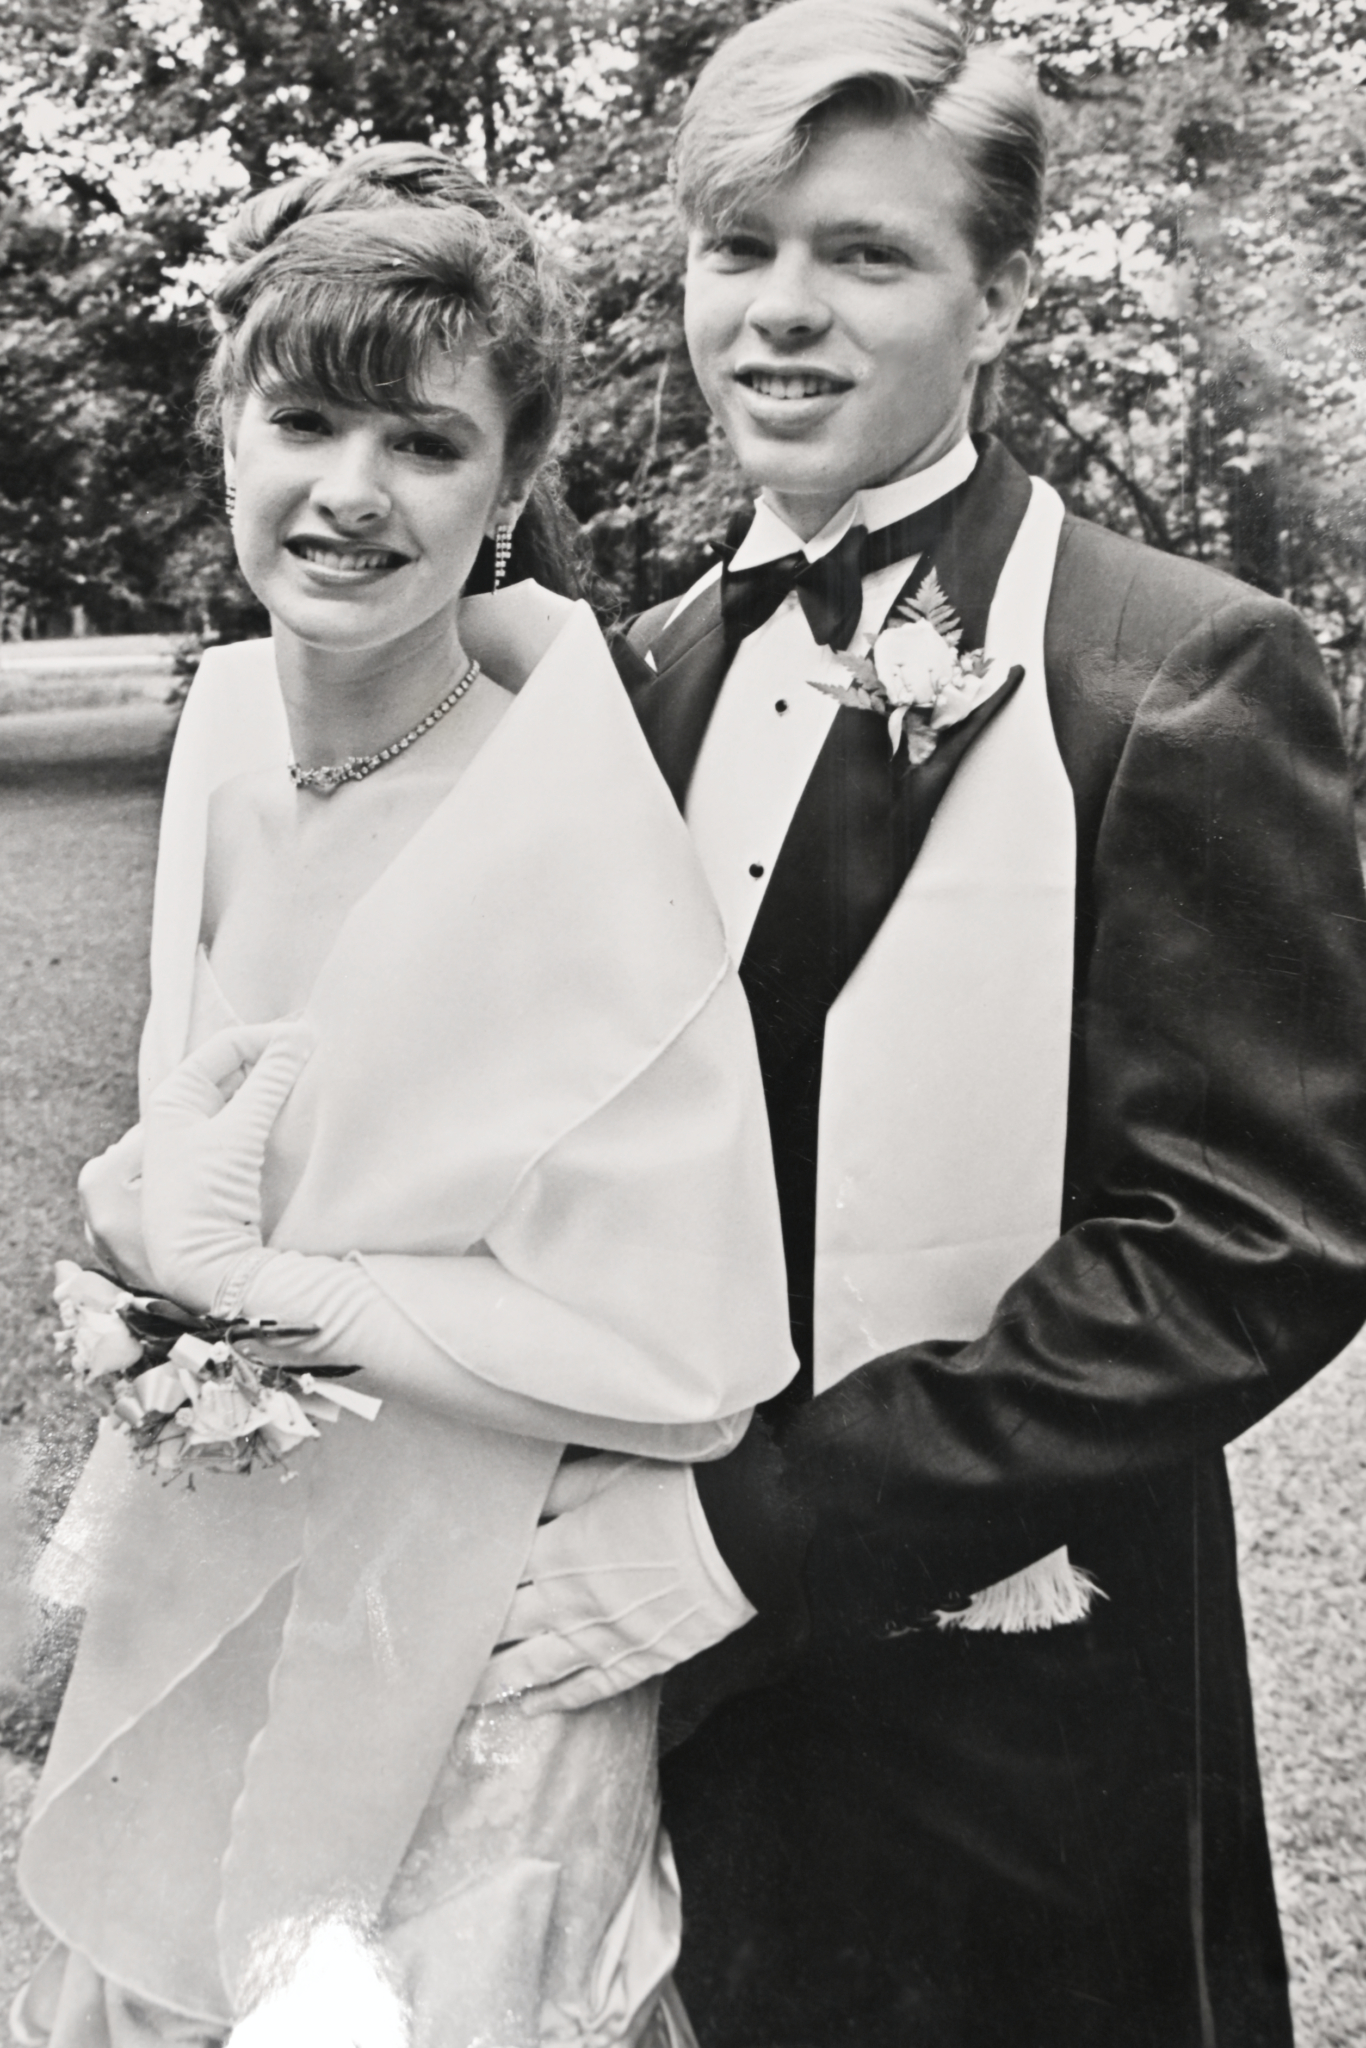 Kristina and Darrell O'Quinn at their prom when they were 18 years old. Photo courtesy of Kristina O'Quinn.